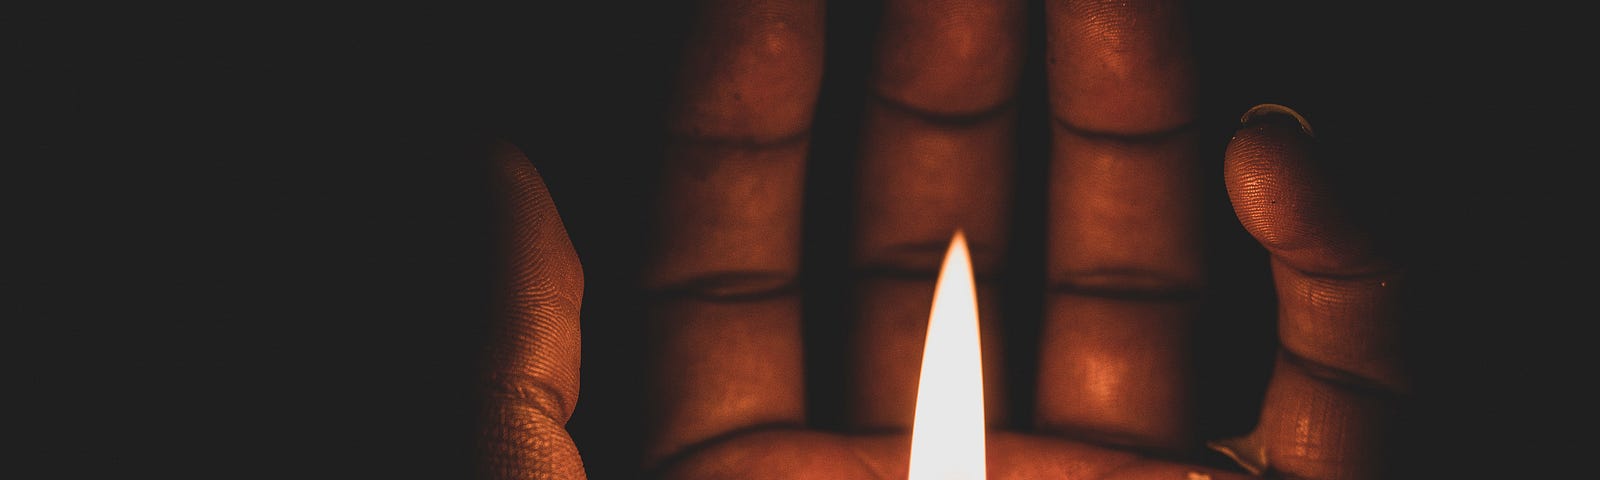 Hand with burning candle stub resting on the open palm.